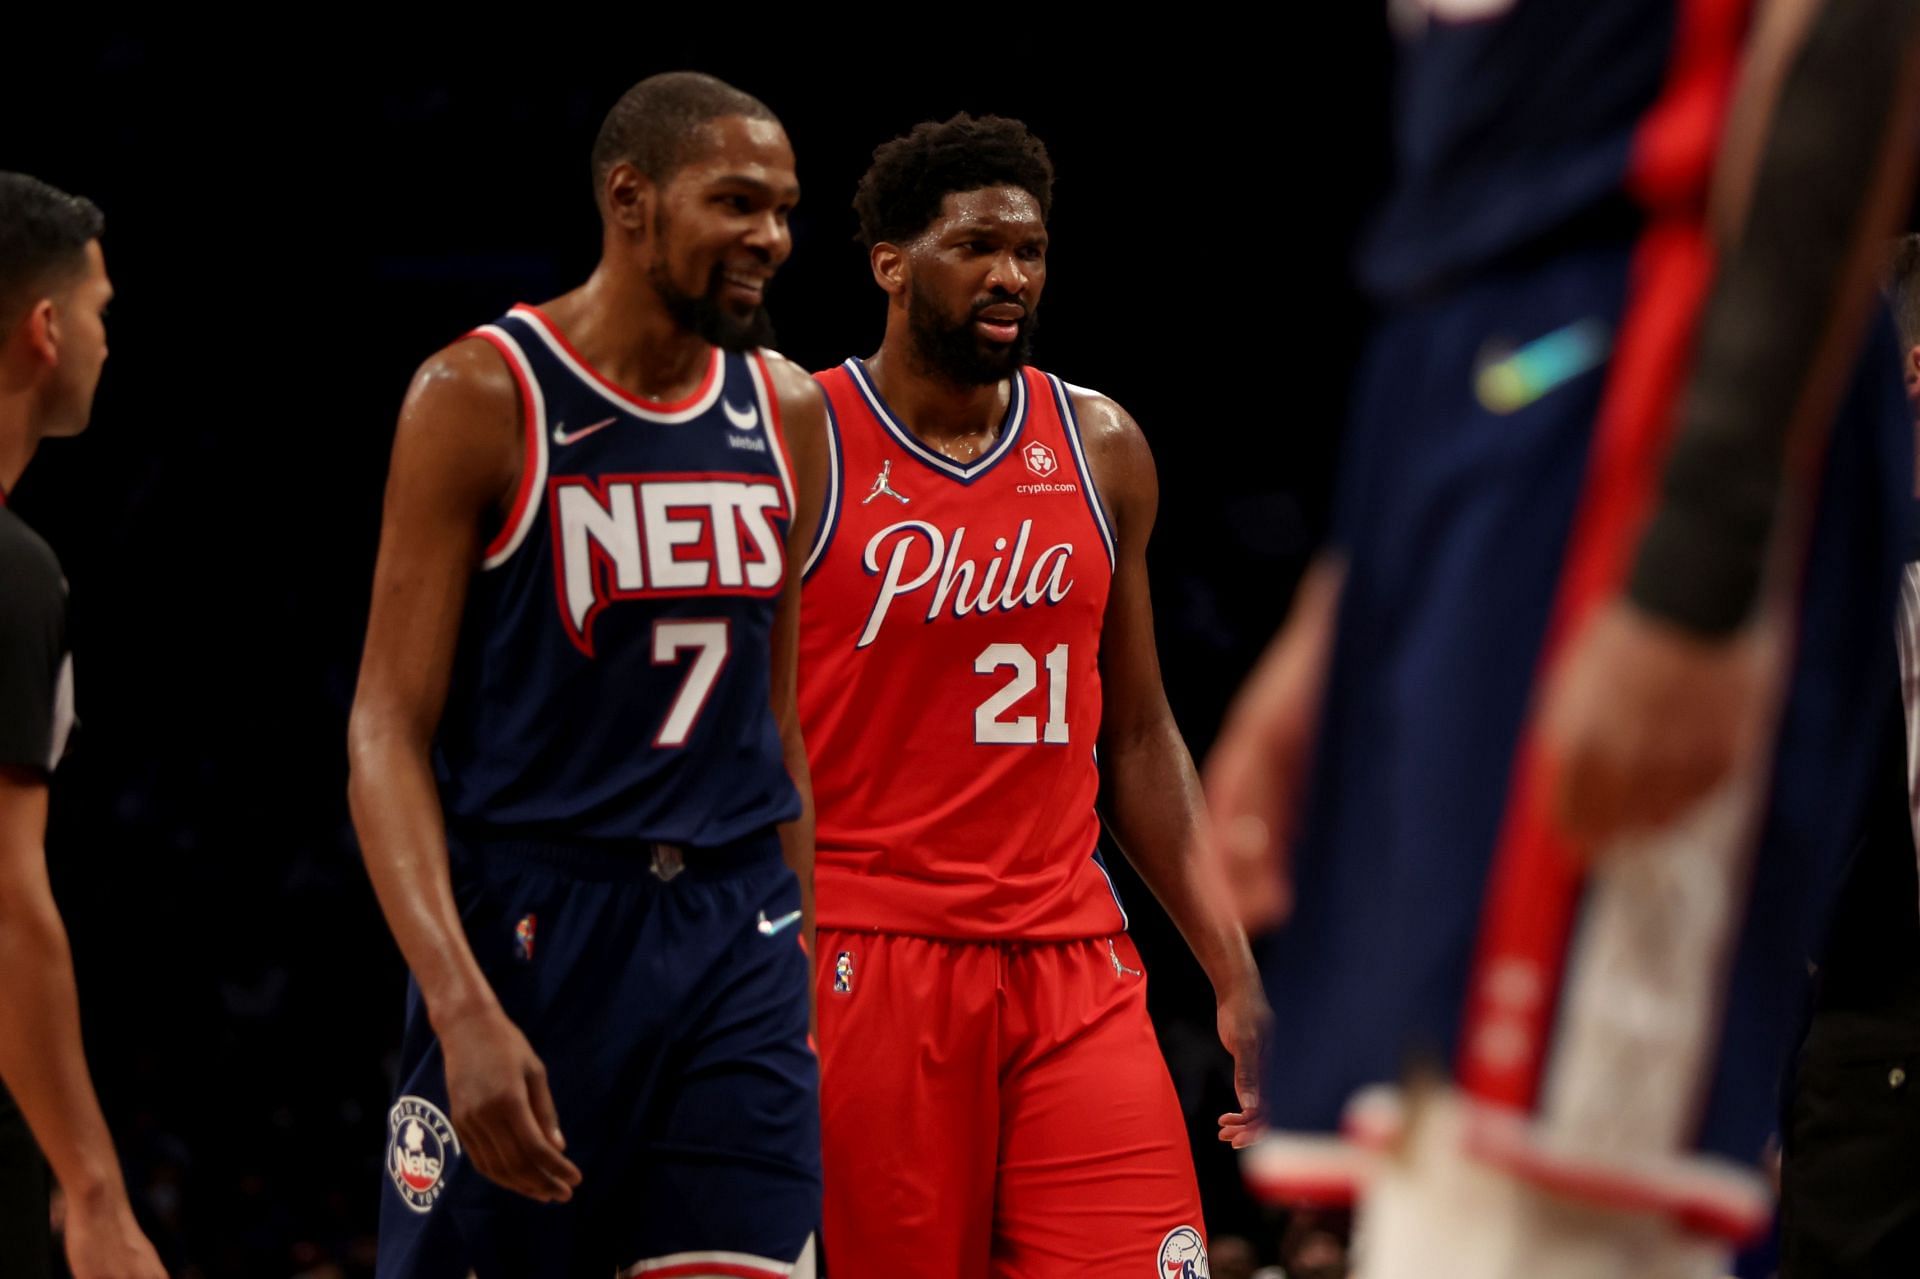 Kevin Durant (L) and Joel Embiid (R) got into it at the end of the Philadelphia 76ers-Brooklyn Nets game